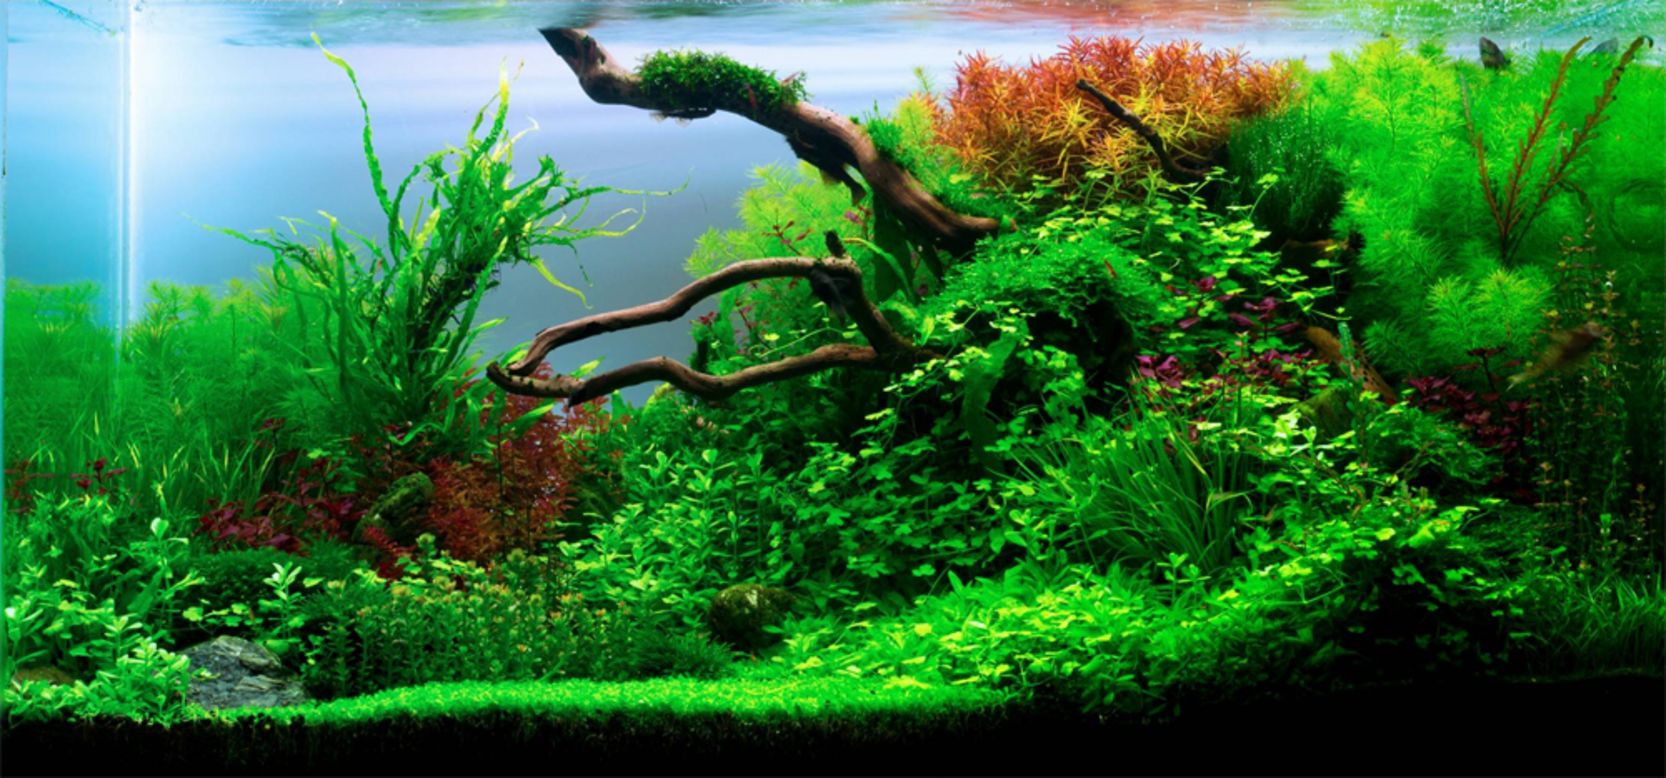 Men lose themselves in the art of aquascaping